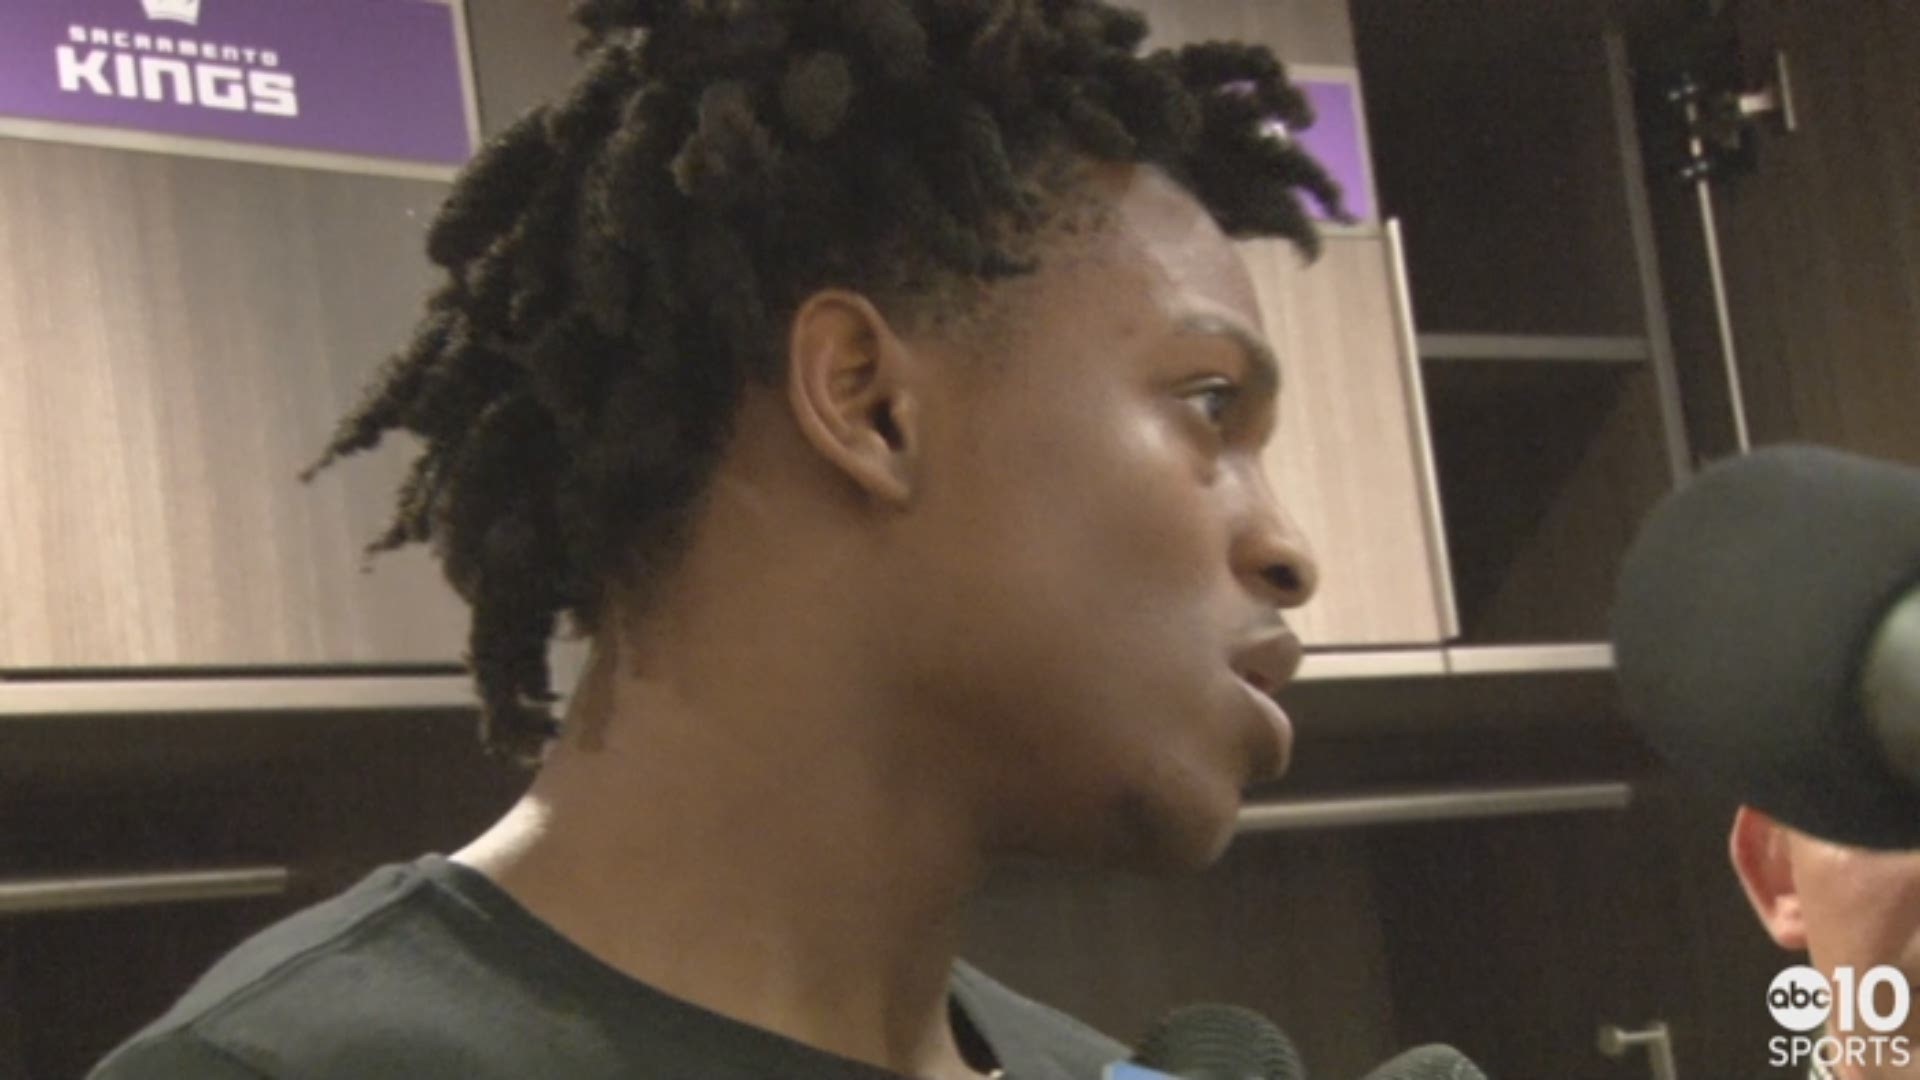 Sacramento Kings rookie guard De'Aaron Fox dicusses Tuesday's win over the Oklahoma City Thunder to snap a seven-game losing streak and rewarding the home fans with the first victory of the season on the home court.